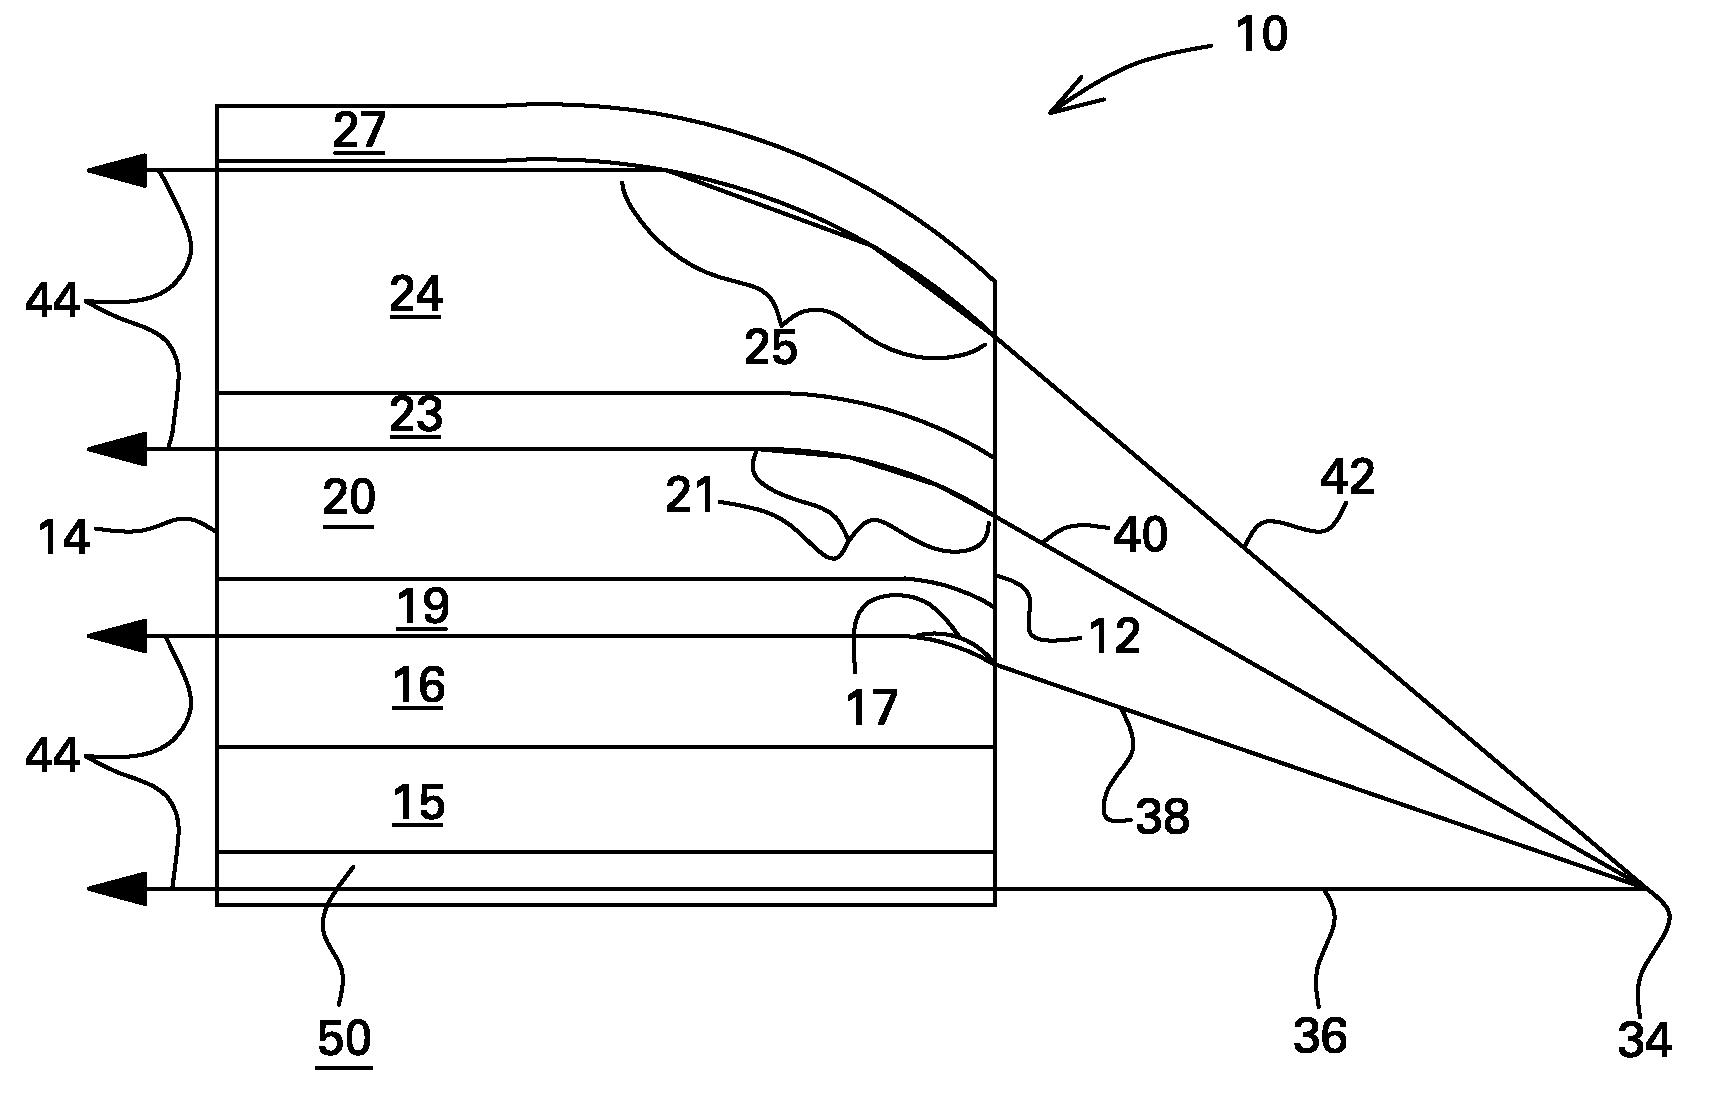 Multi-energy imaging system and method using optic devices